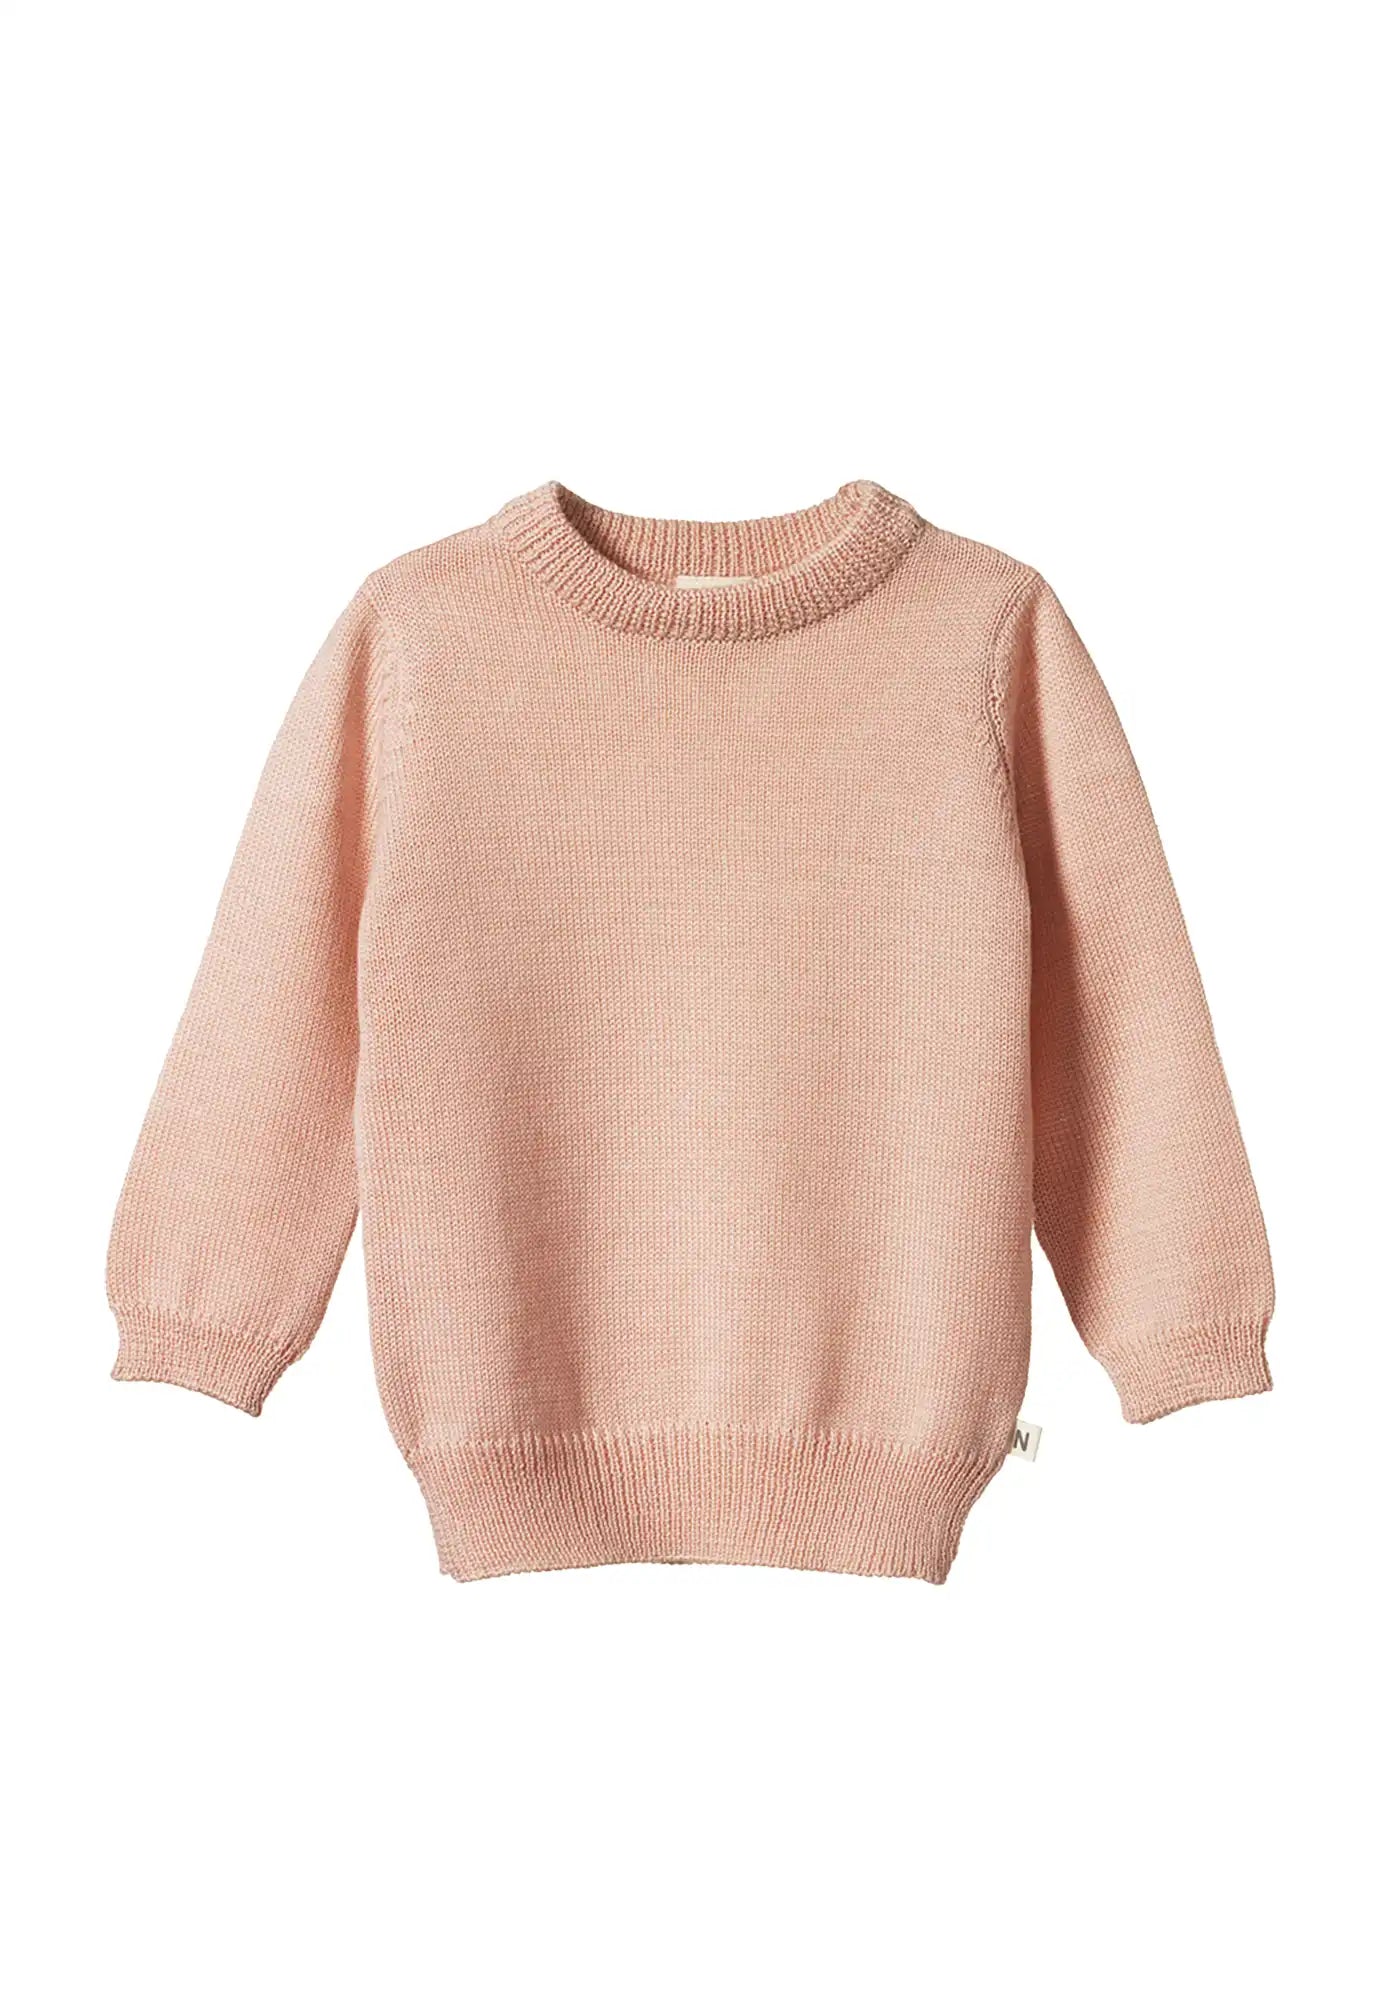 nature baby - merino knit pullover - rose dust